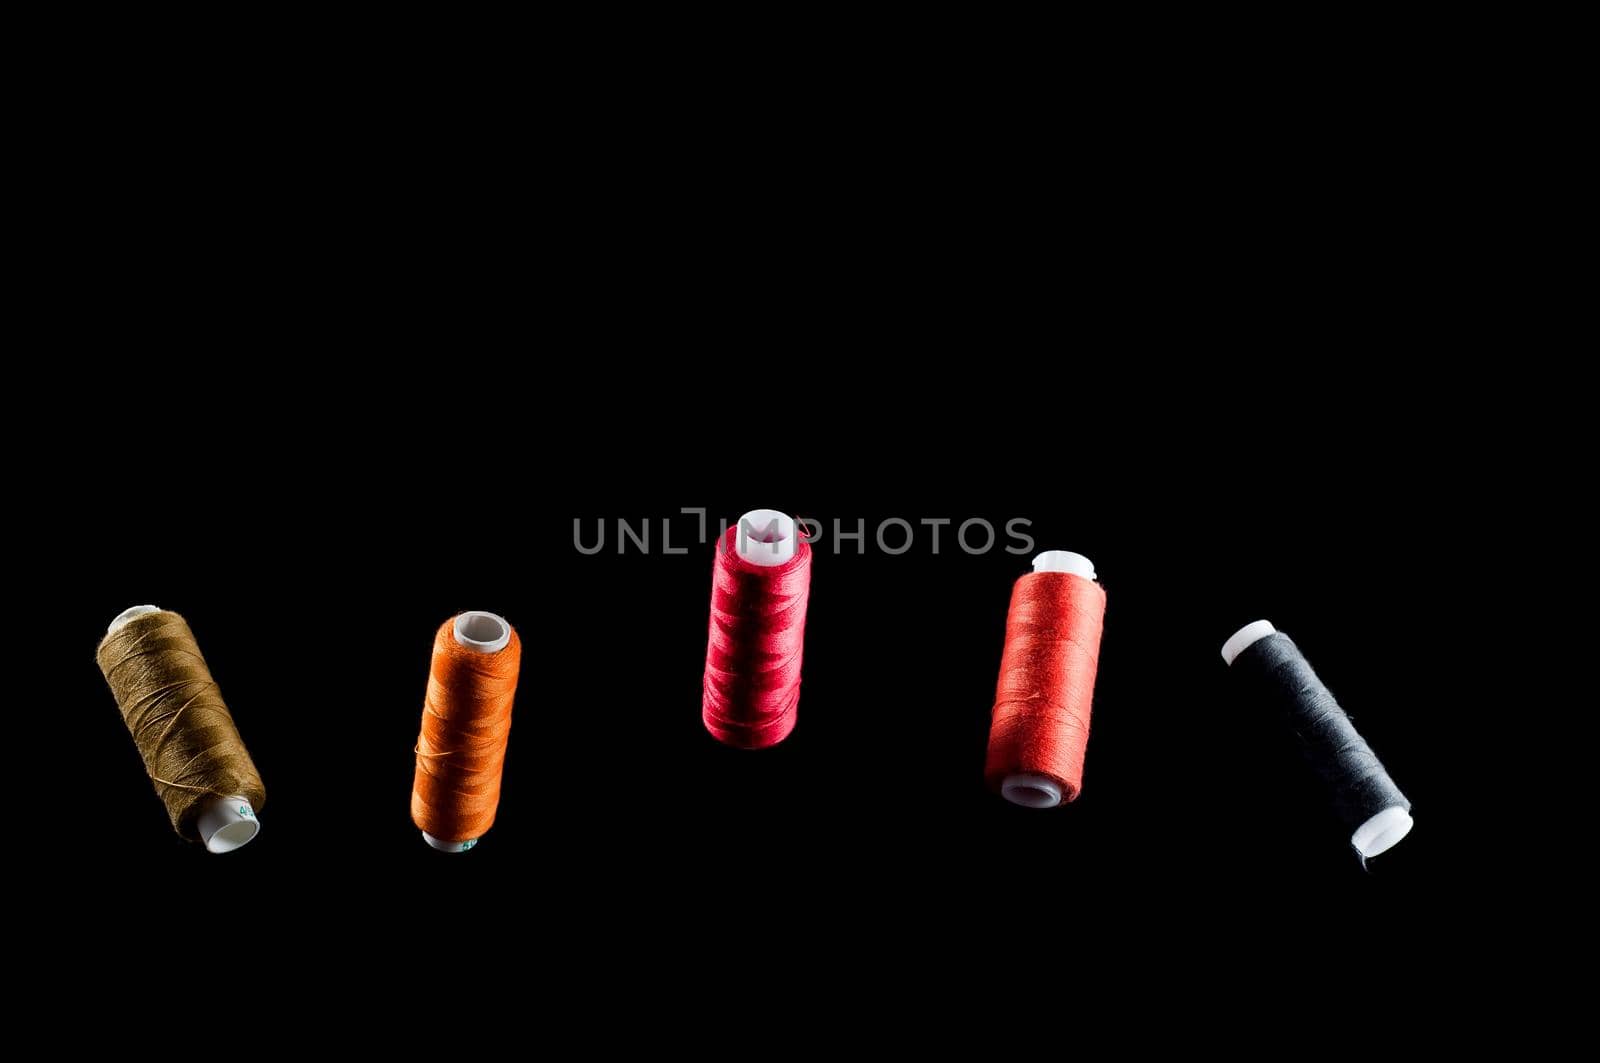 Black, bronze, orange, red and pink threads floating in the air against a black background, isolate by Vladvvv